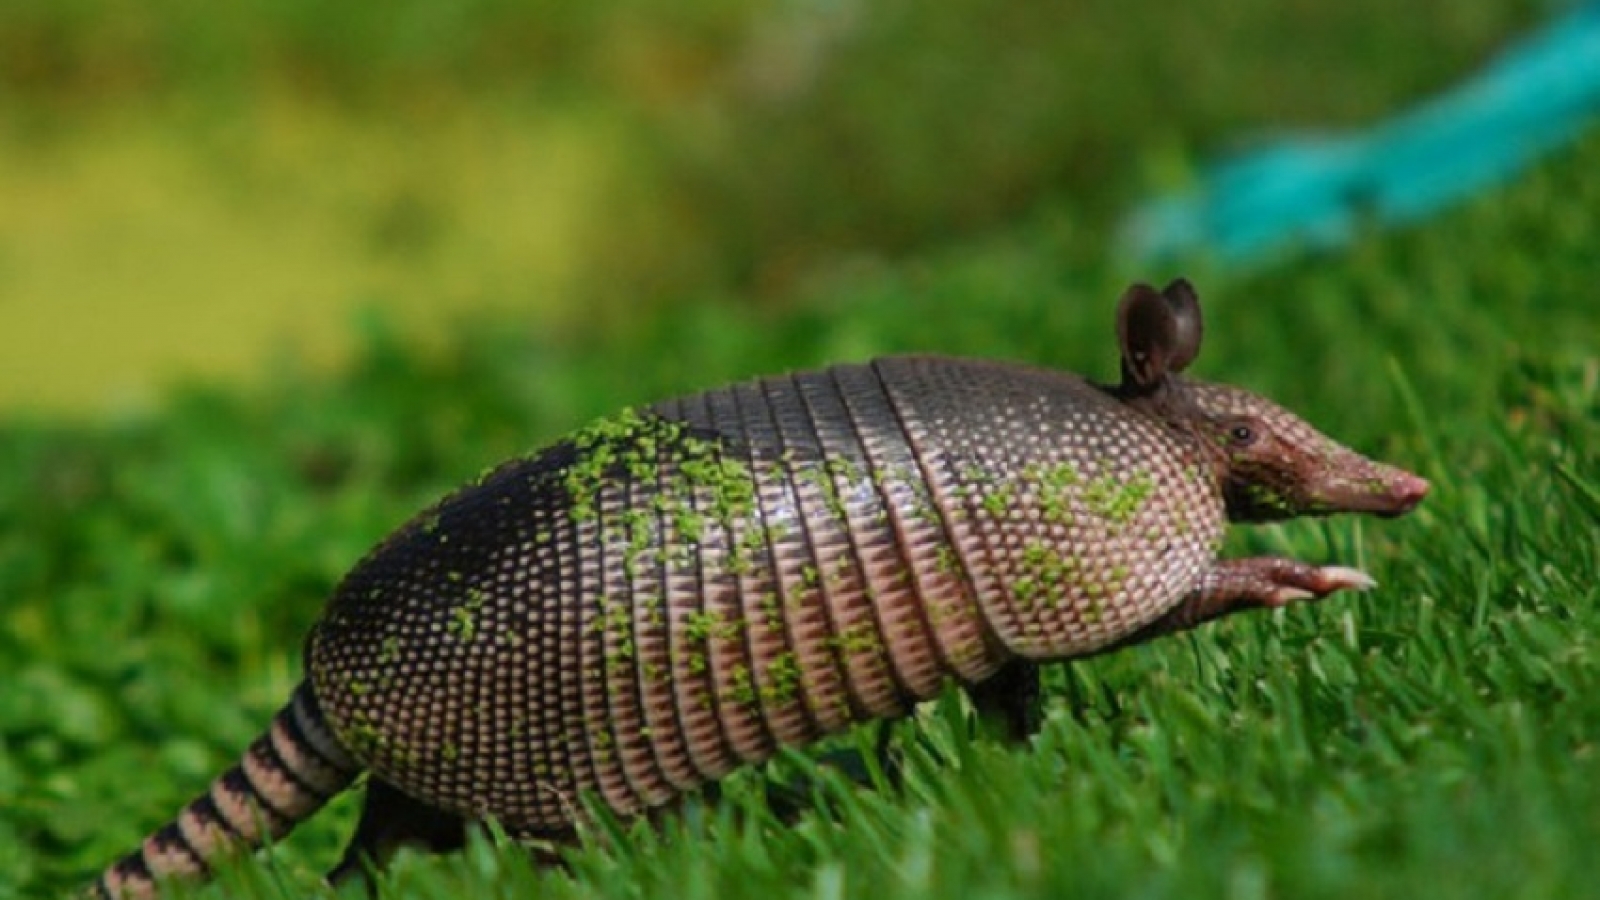 What do armadillos eat